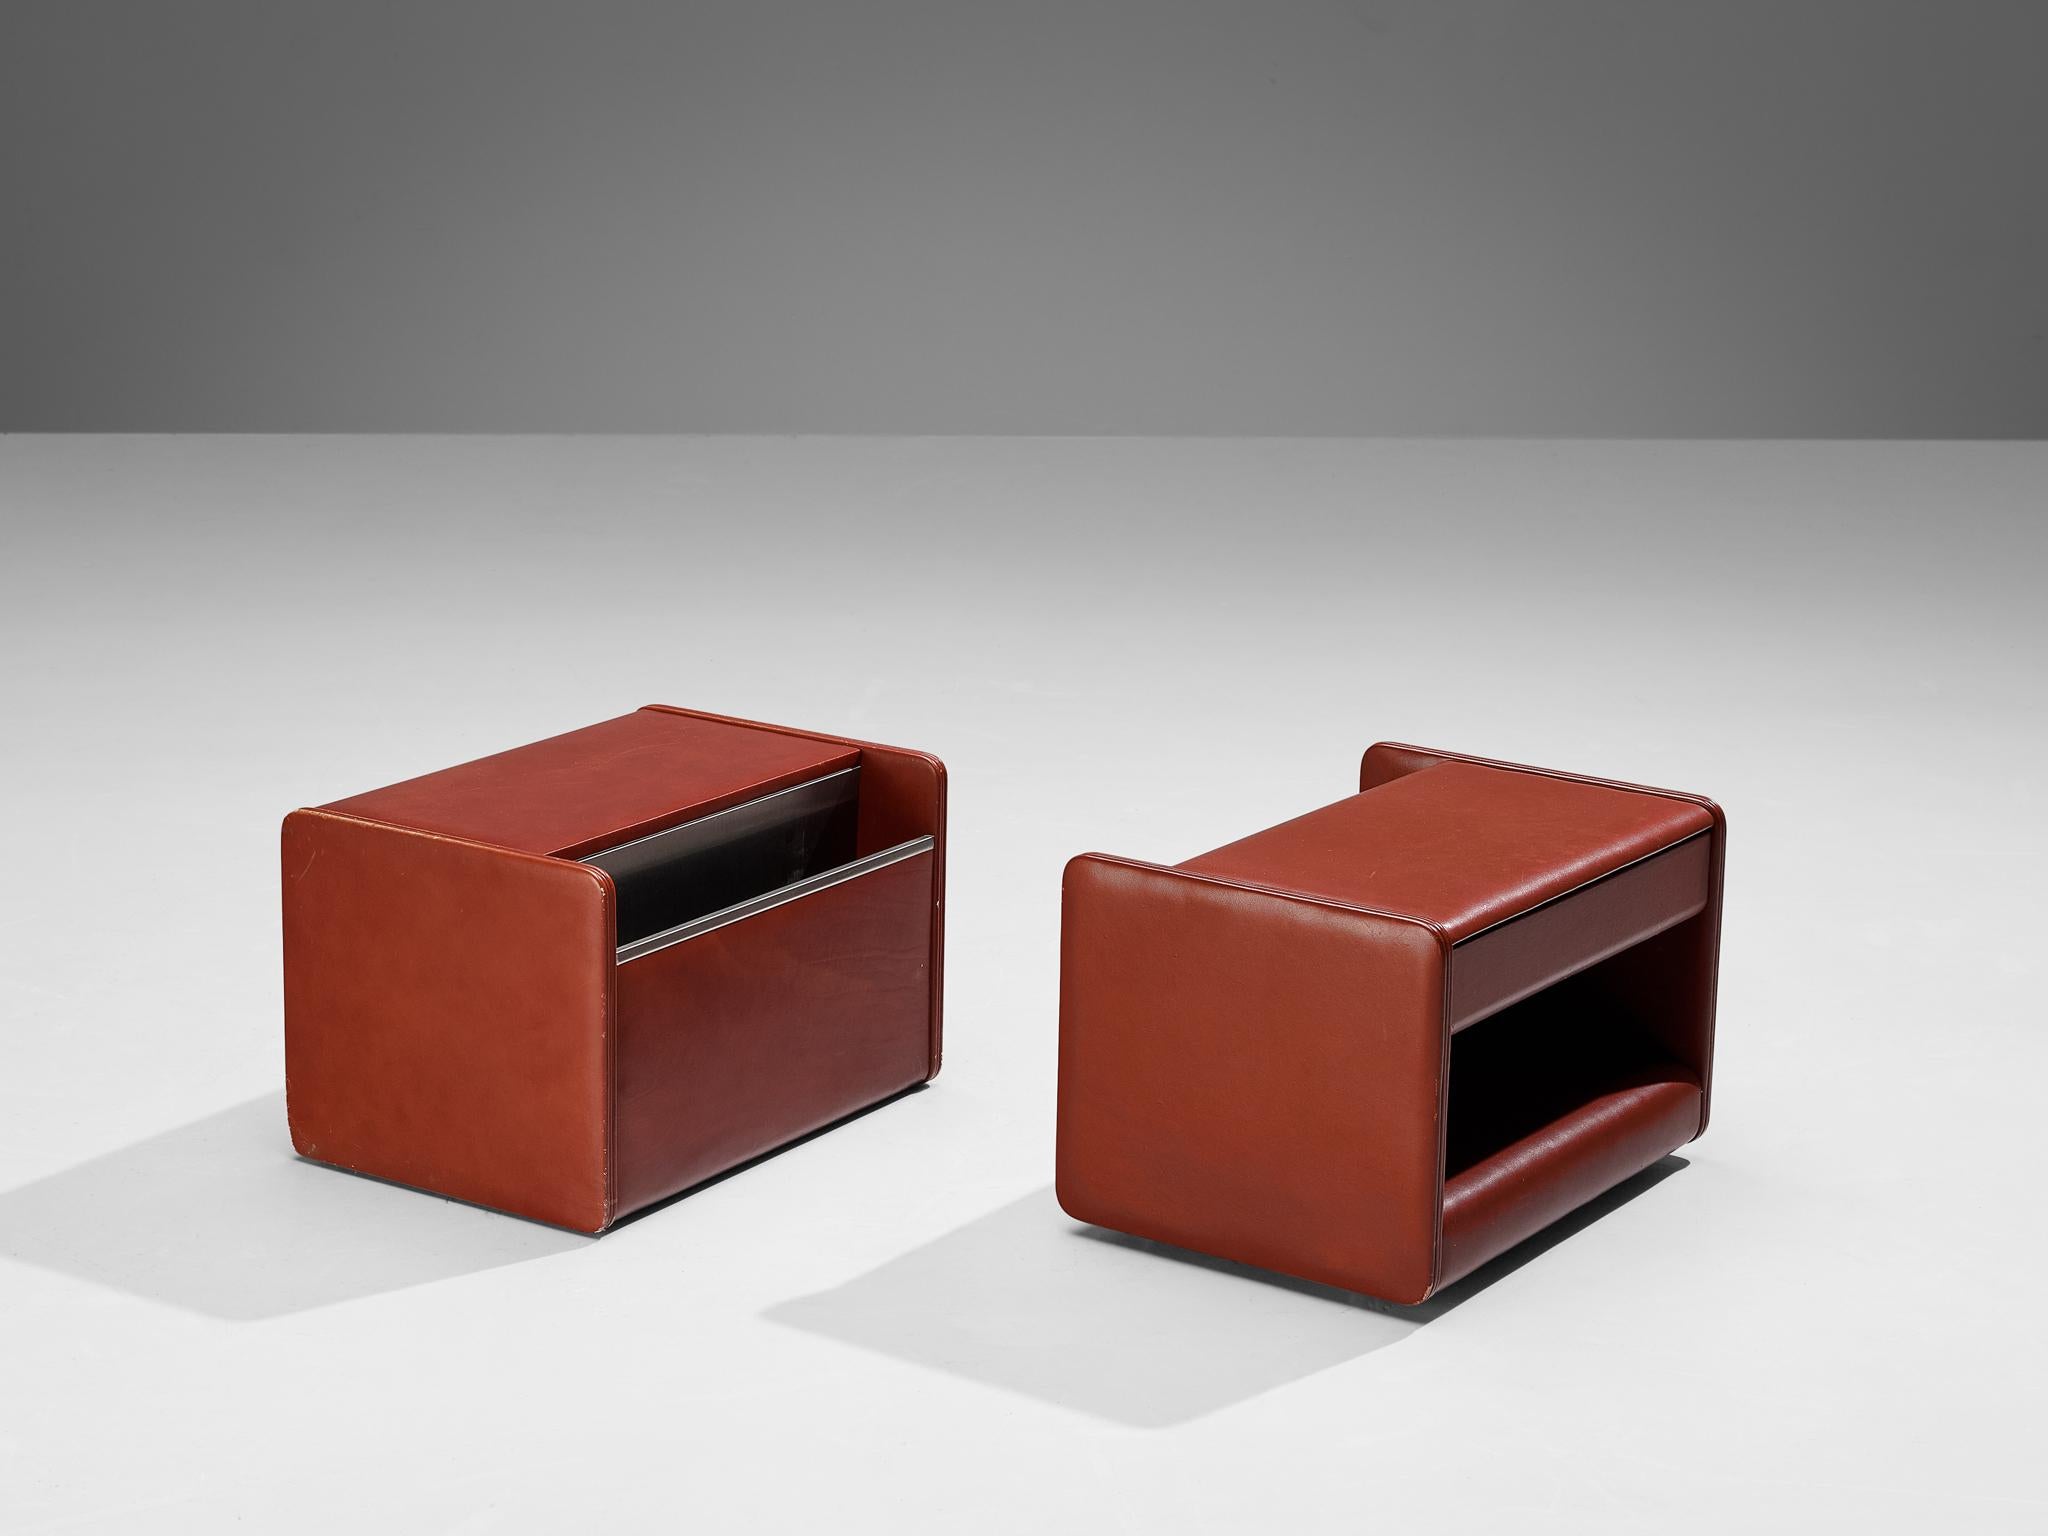 Luigi Massoni for Poltrona Frau, night stands, leather, aluminum, Italy, 1972

Luigi Massoni designed these pieces for Poltrona Frau and can function as nightstands or side tables. The design is based on a streamlined layout with clear lines and